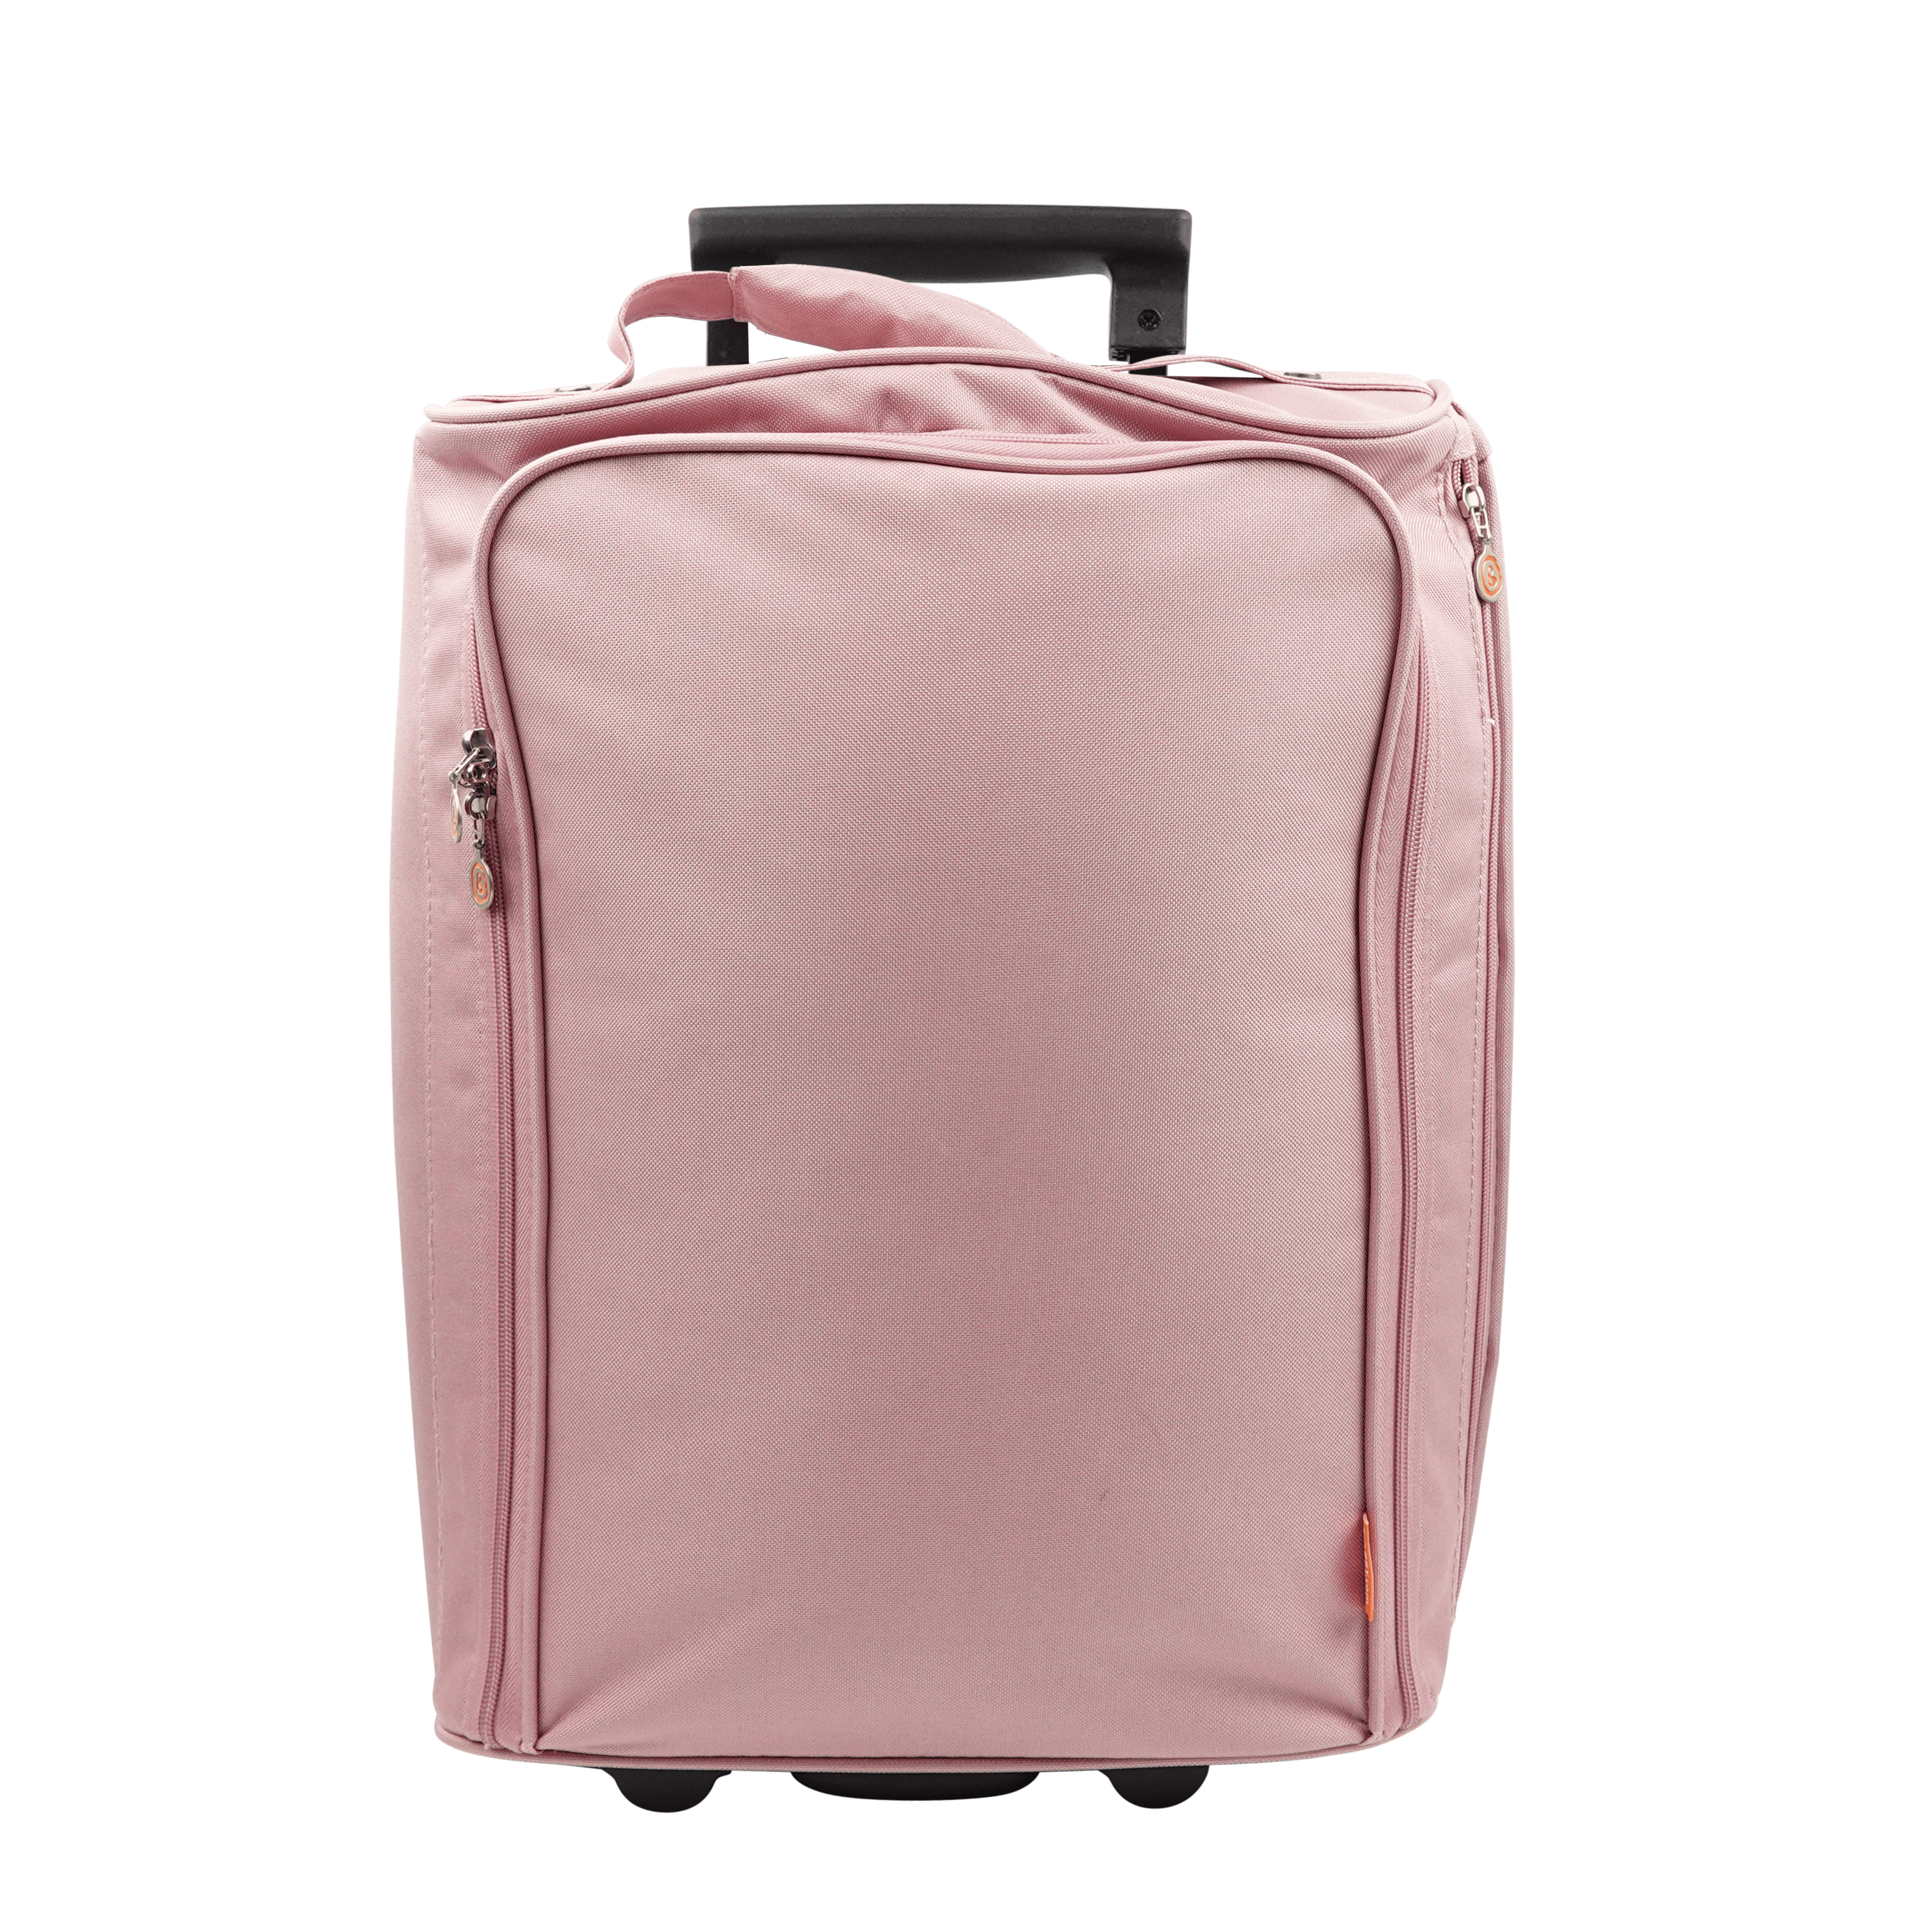 Kindertrolley small oud roze